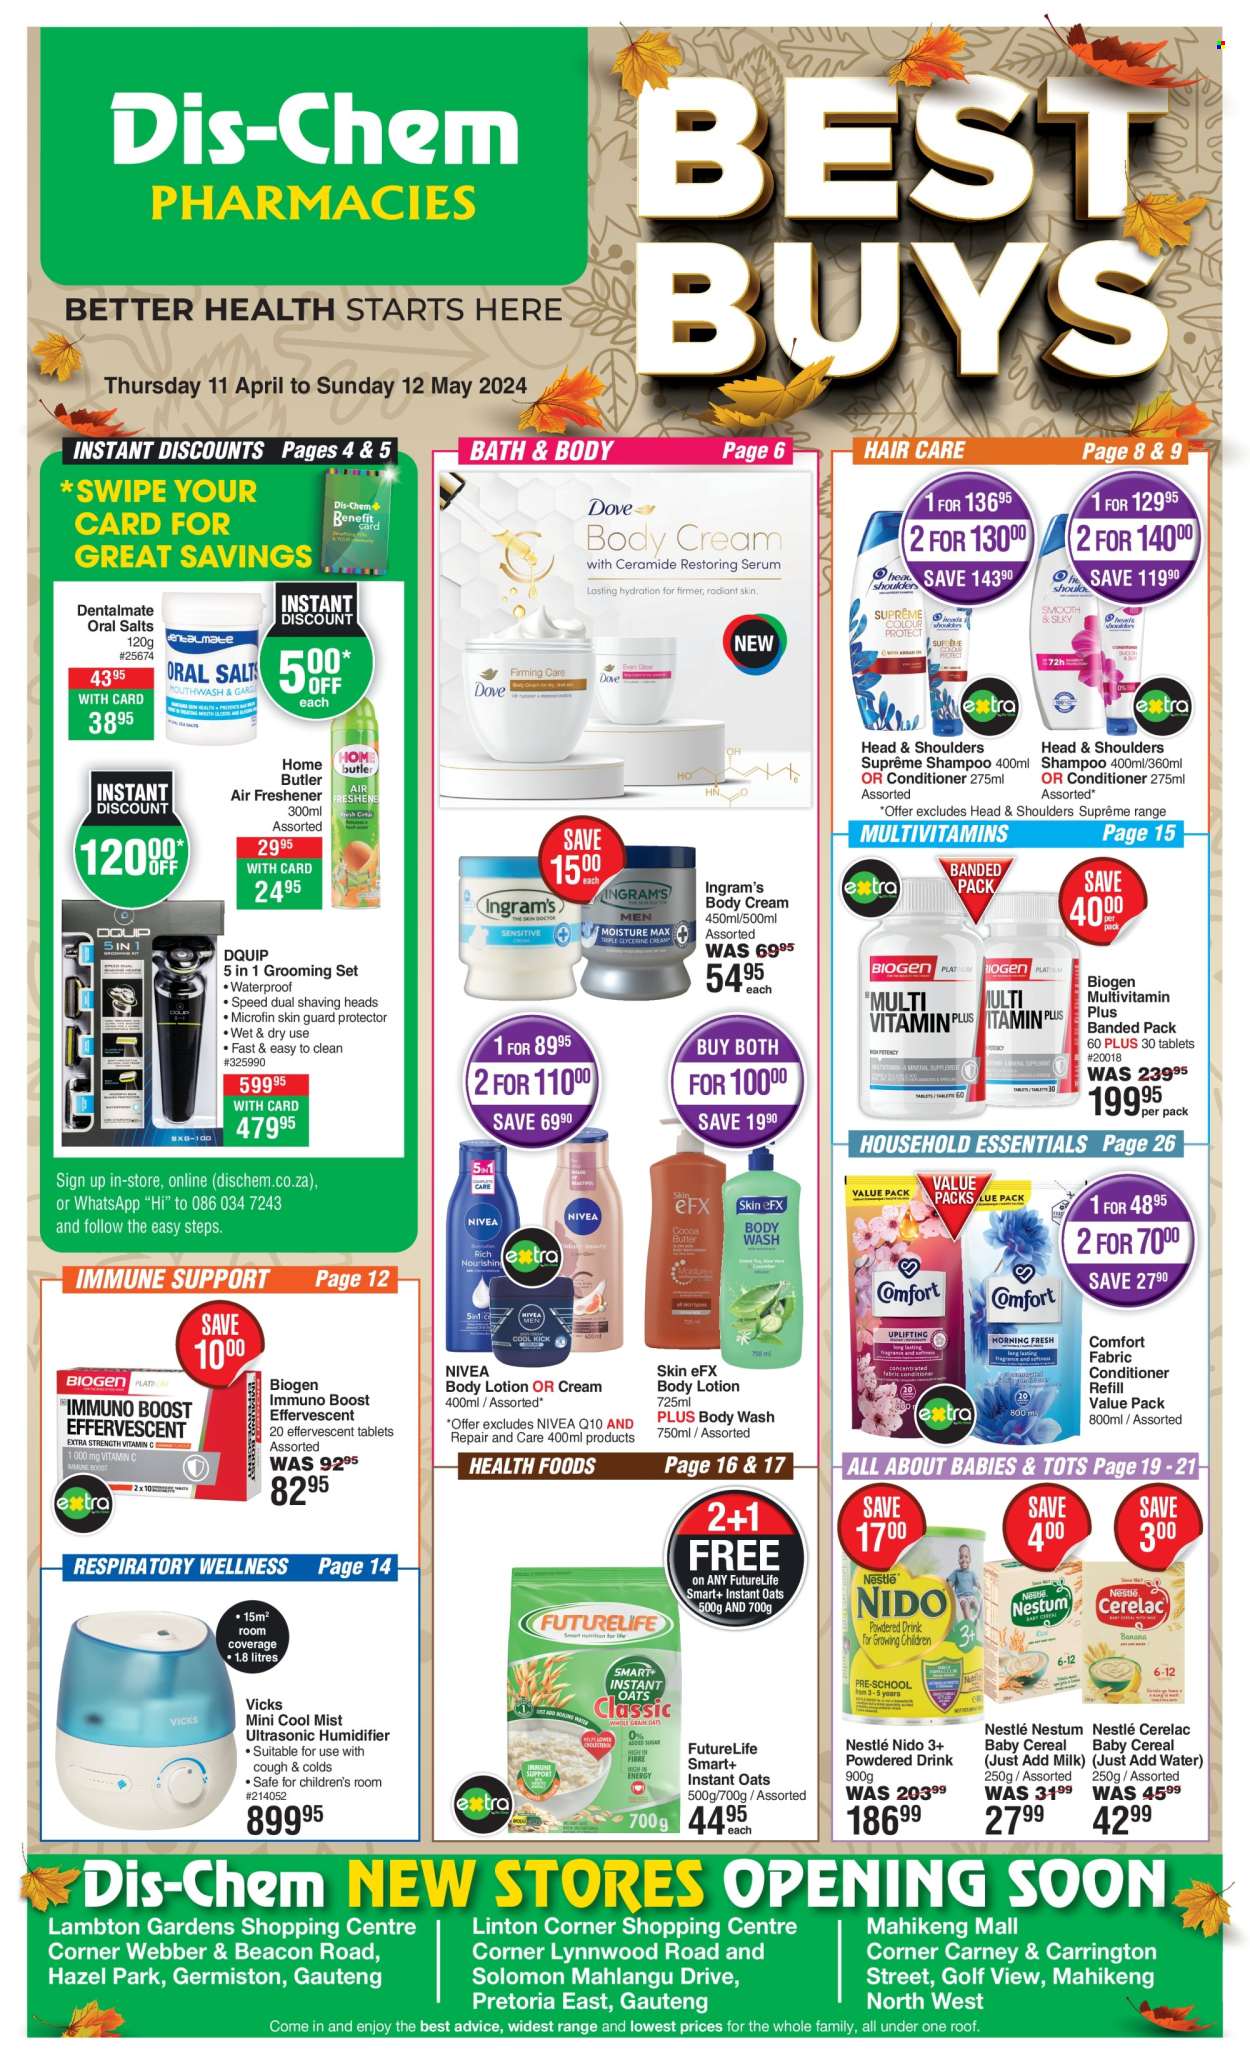 thumbnail - Dis-Chem catalogue  - 11/04/2024 - 12/05/2024 - Sales products - Nivea, fabric softener, Comfort softener, body wash, shampoo, hair products, Head & Shoulders, body lotion, body cream, grooming set, Vicks, humidifier, multivitamin, Nestlé. Page 1.